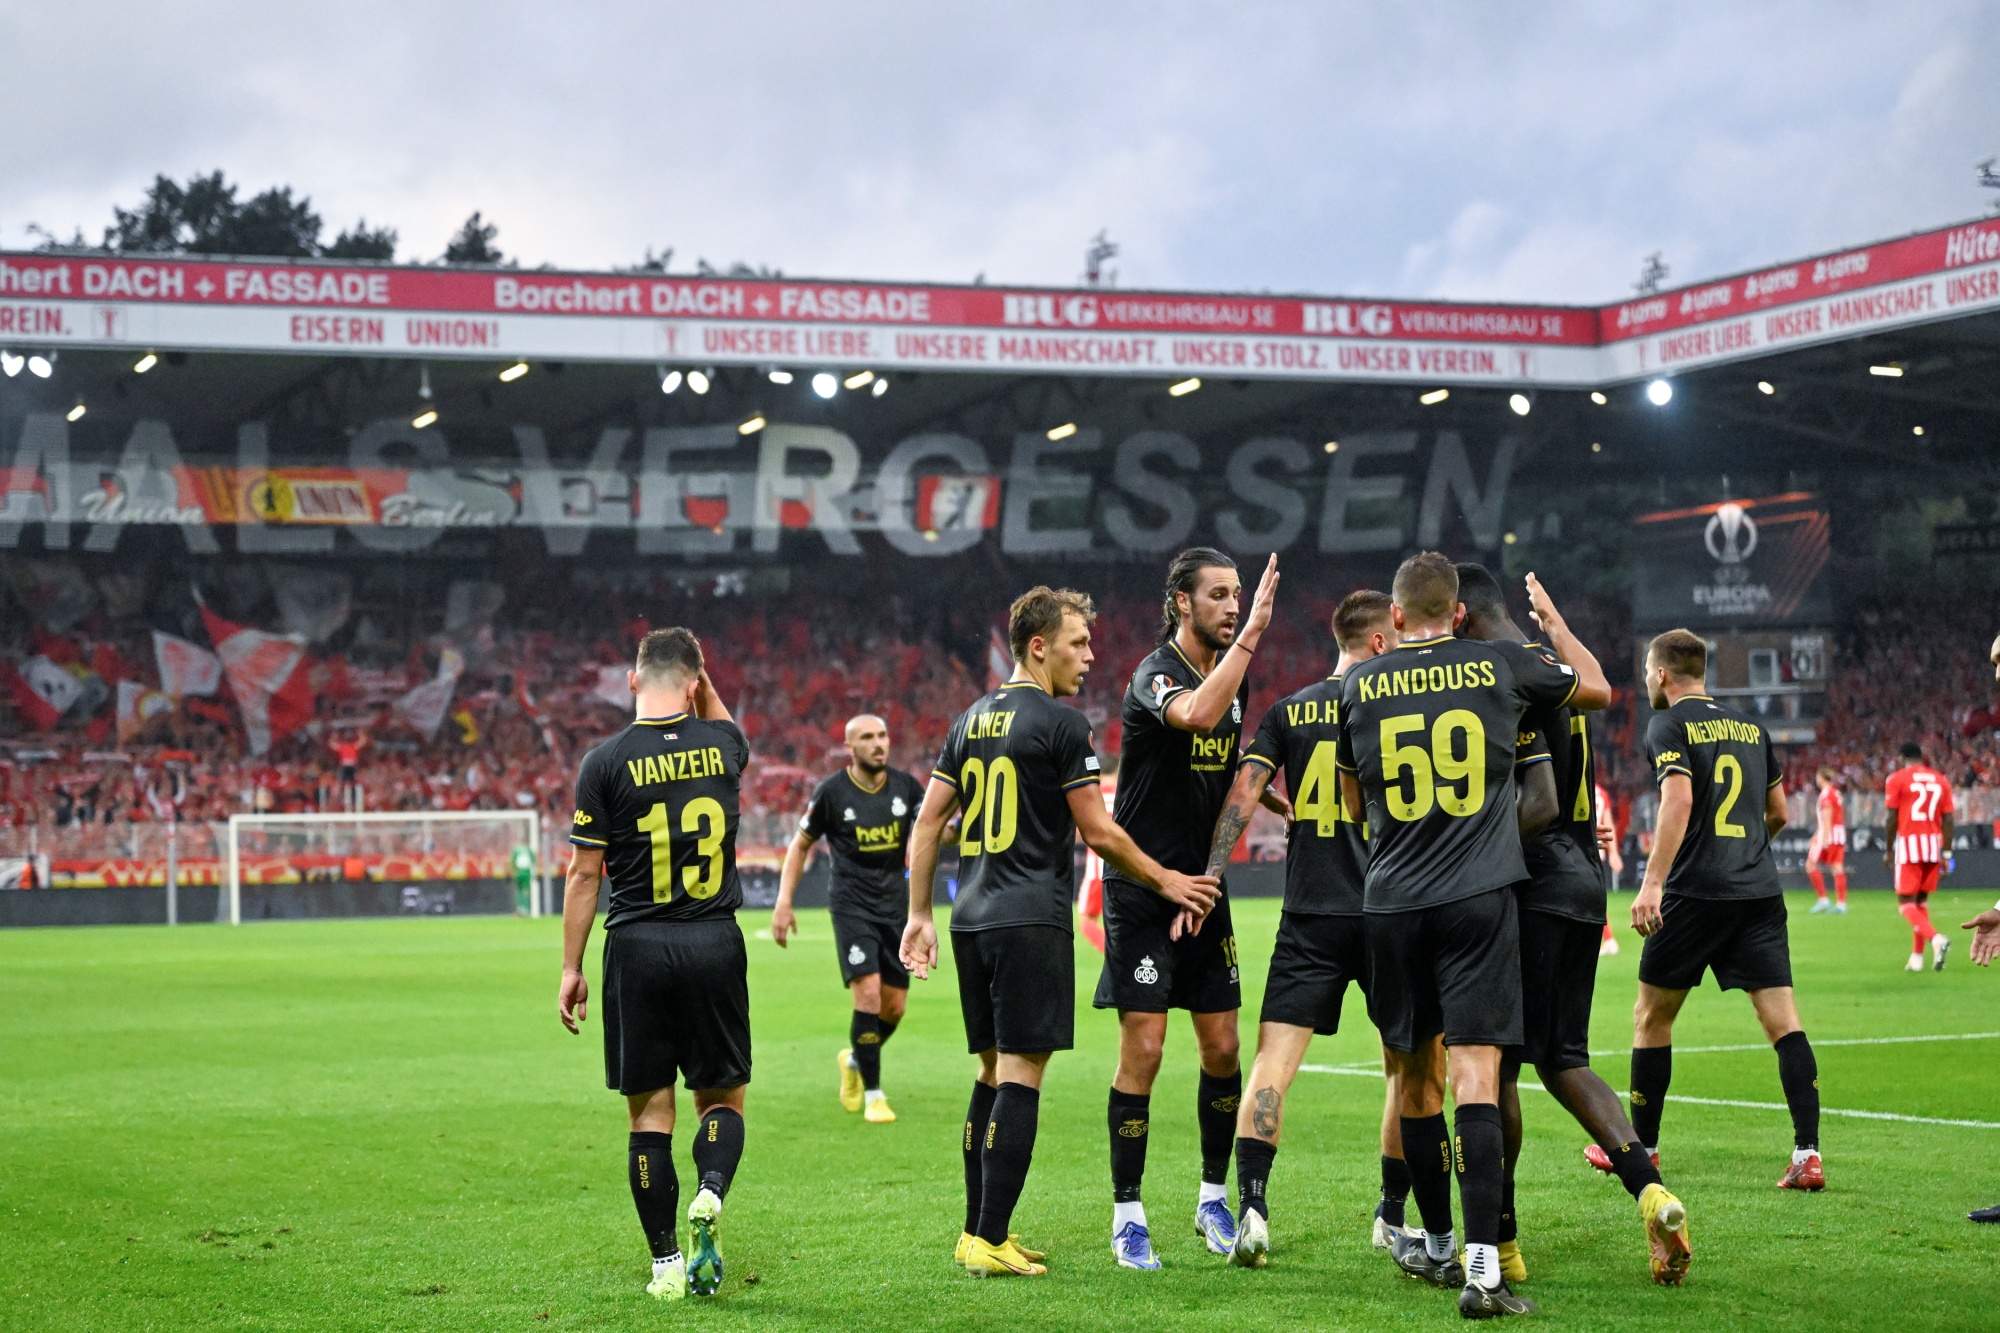 Union's Senne Lynen celebrates with his teammates after scoring during a match between FC Union Berlin and Belgian soccer team Royale Union Saint-Gilloise, Thursday 08 September 2022 in Berlin, the first game out of six in the group stage of the UEFA Europa League competition. BELGA PHOTO LAURIE DIEFFEMBACQ